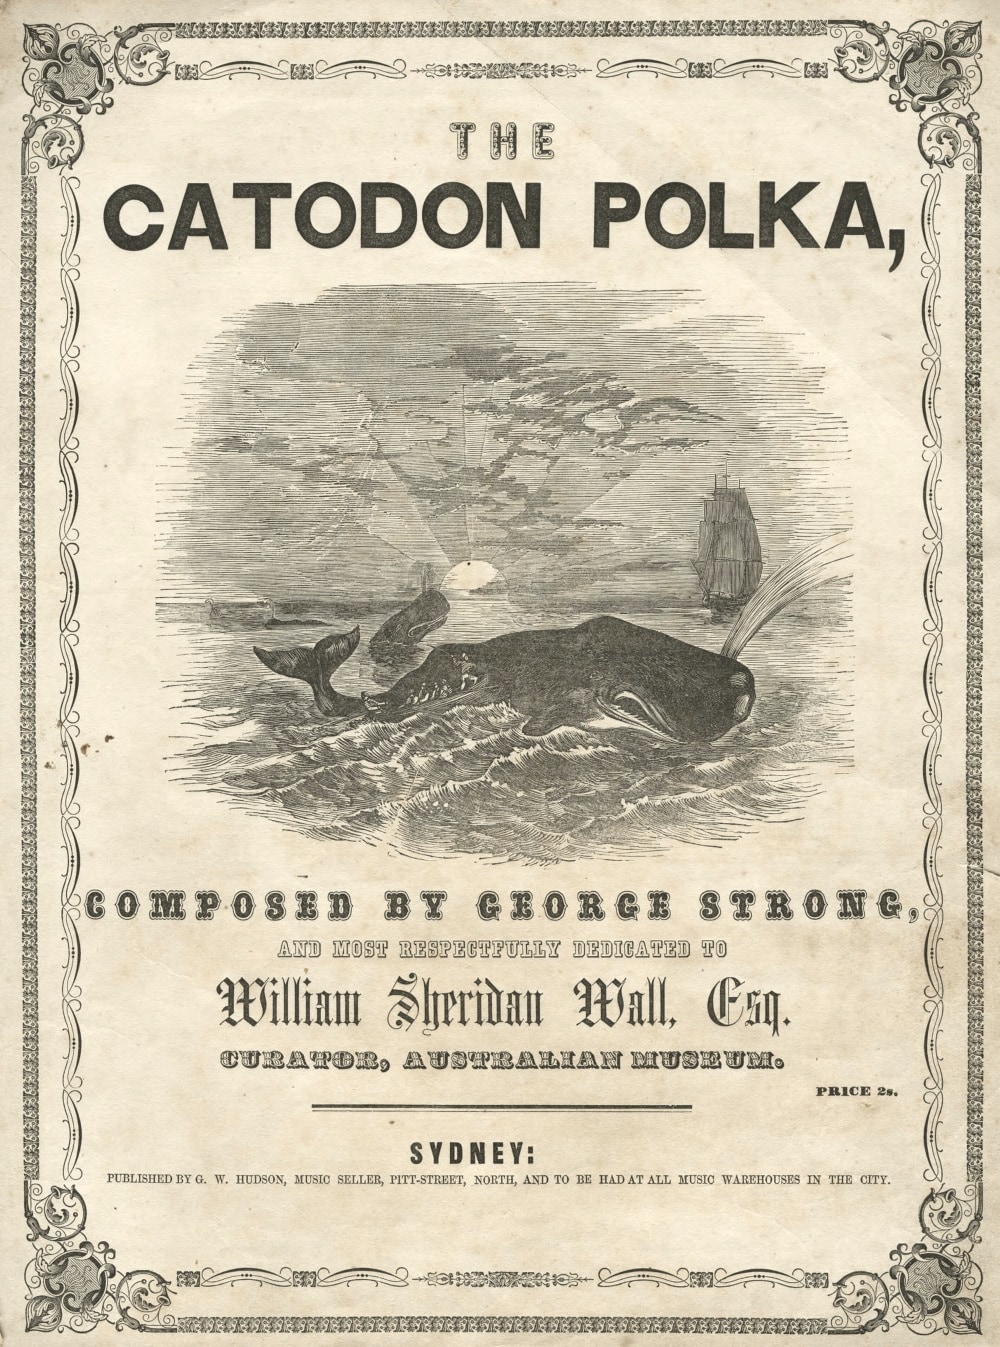 The catodon polka, by George Strong (Sydney: Hudson, 1854); National Library of Australia